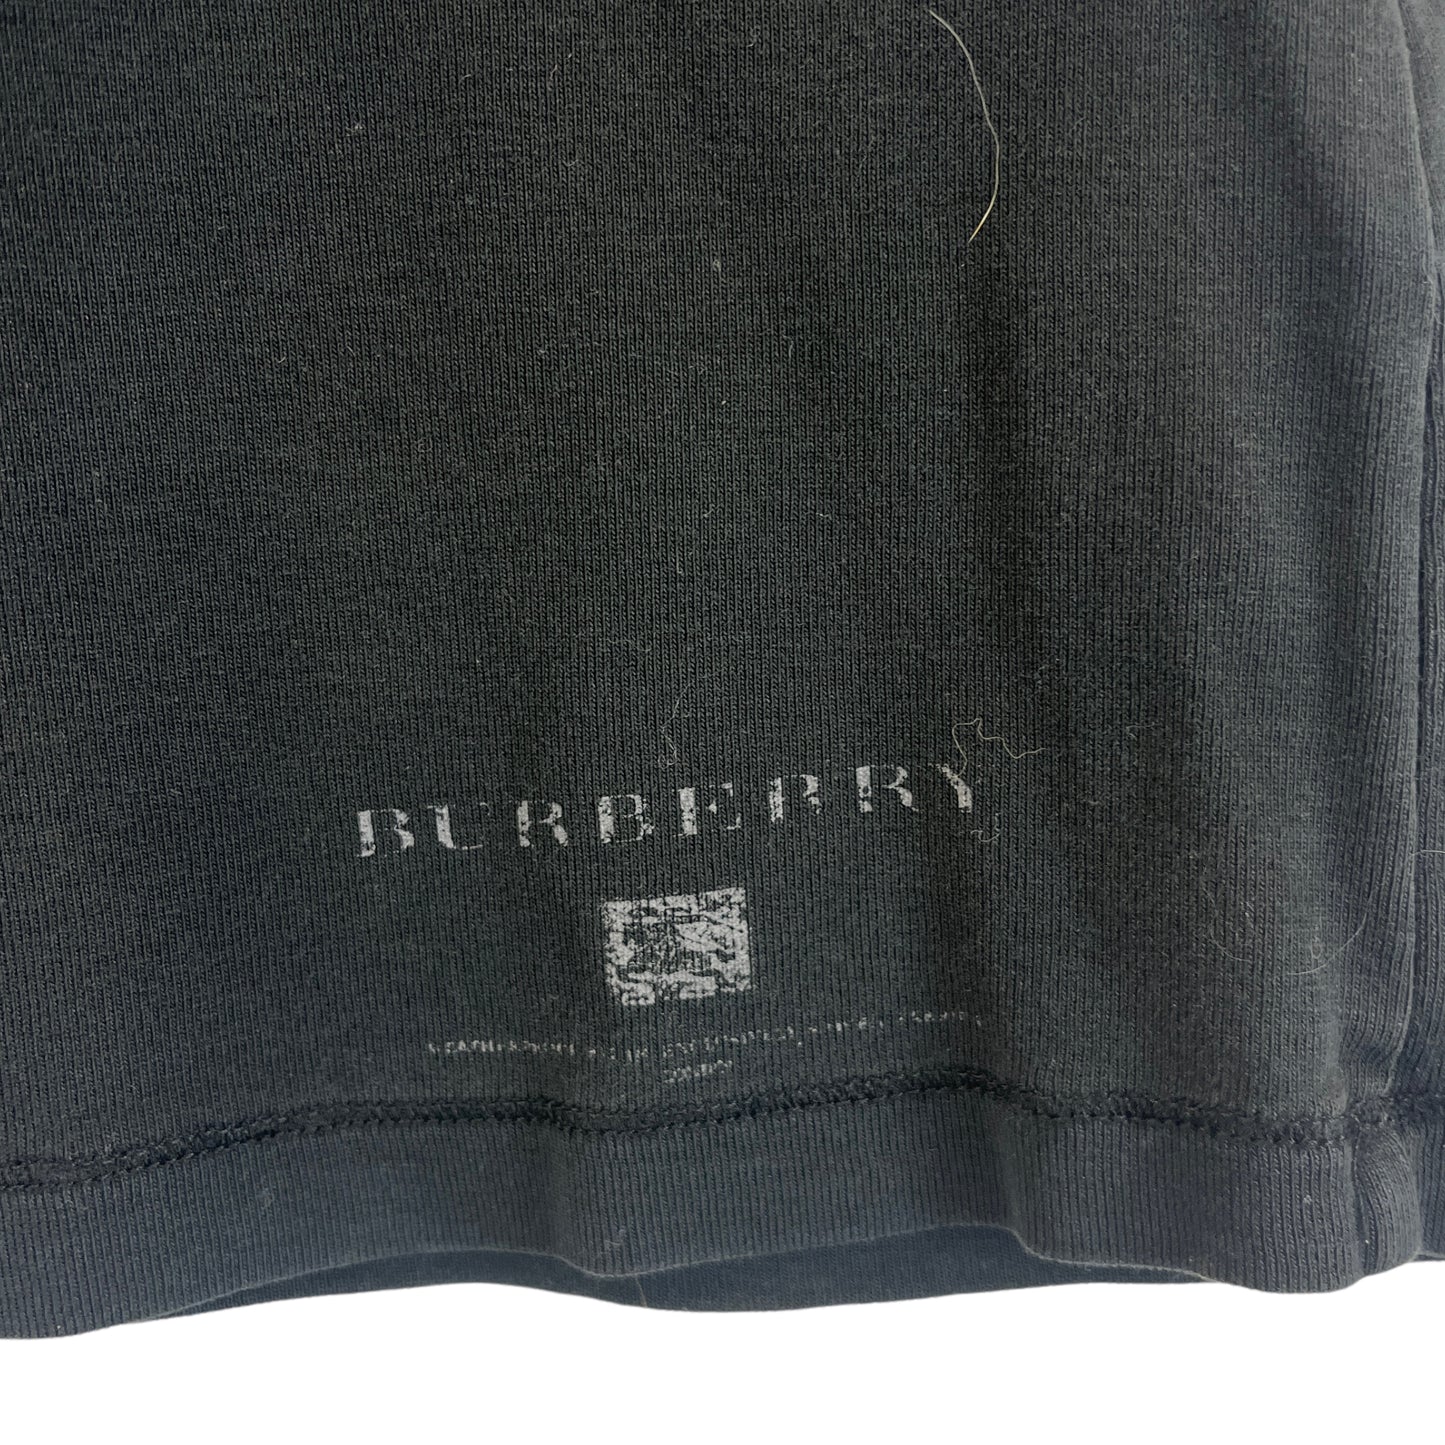 Top Long Sleeve Luxury Designer By Burberry Brit  Size: XS